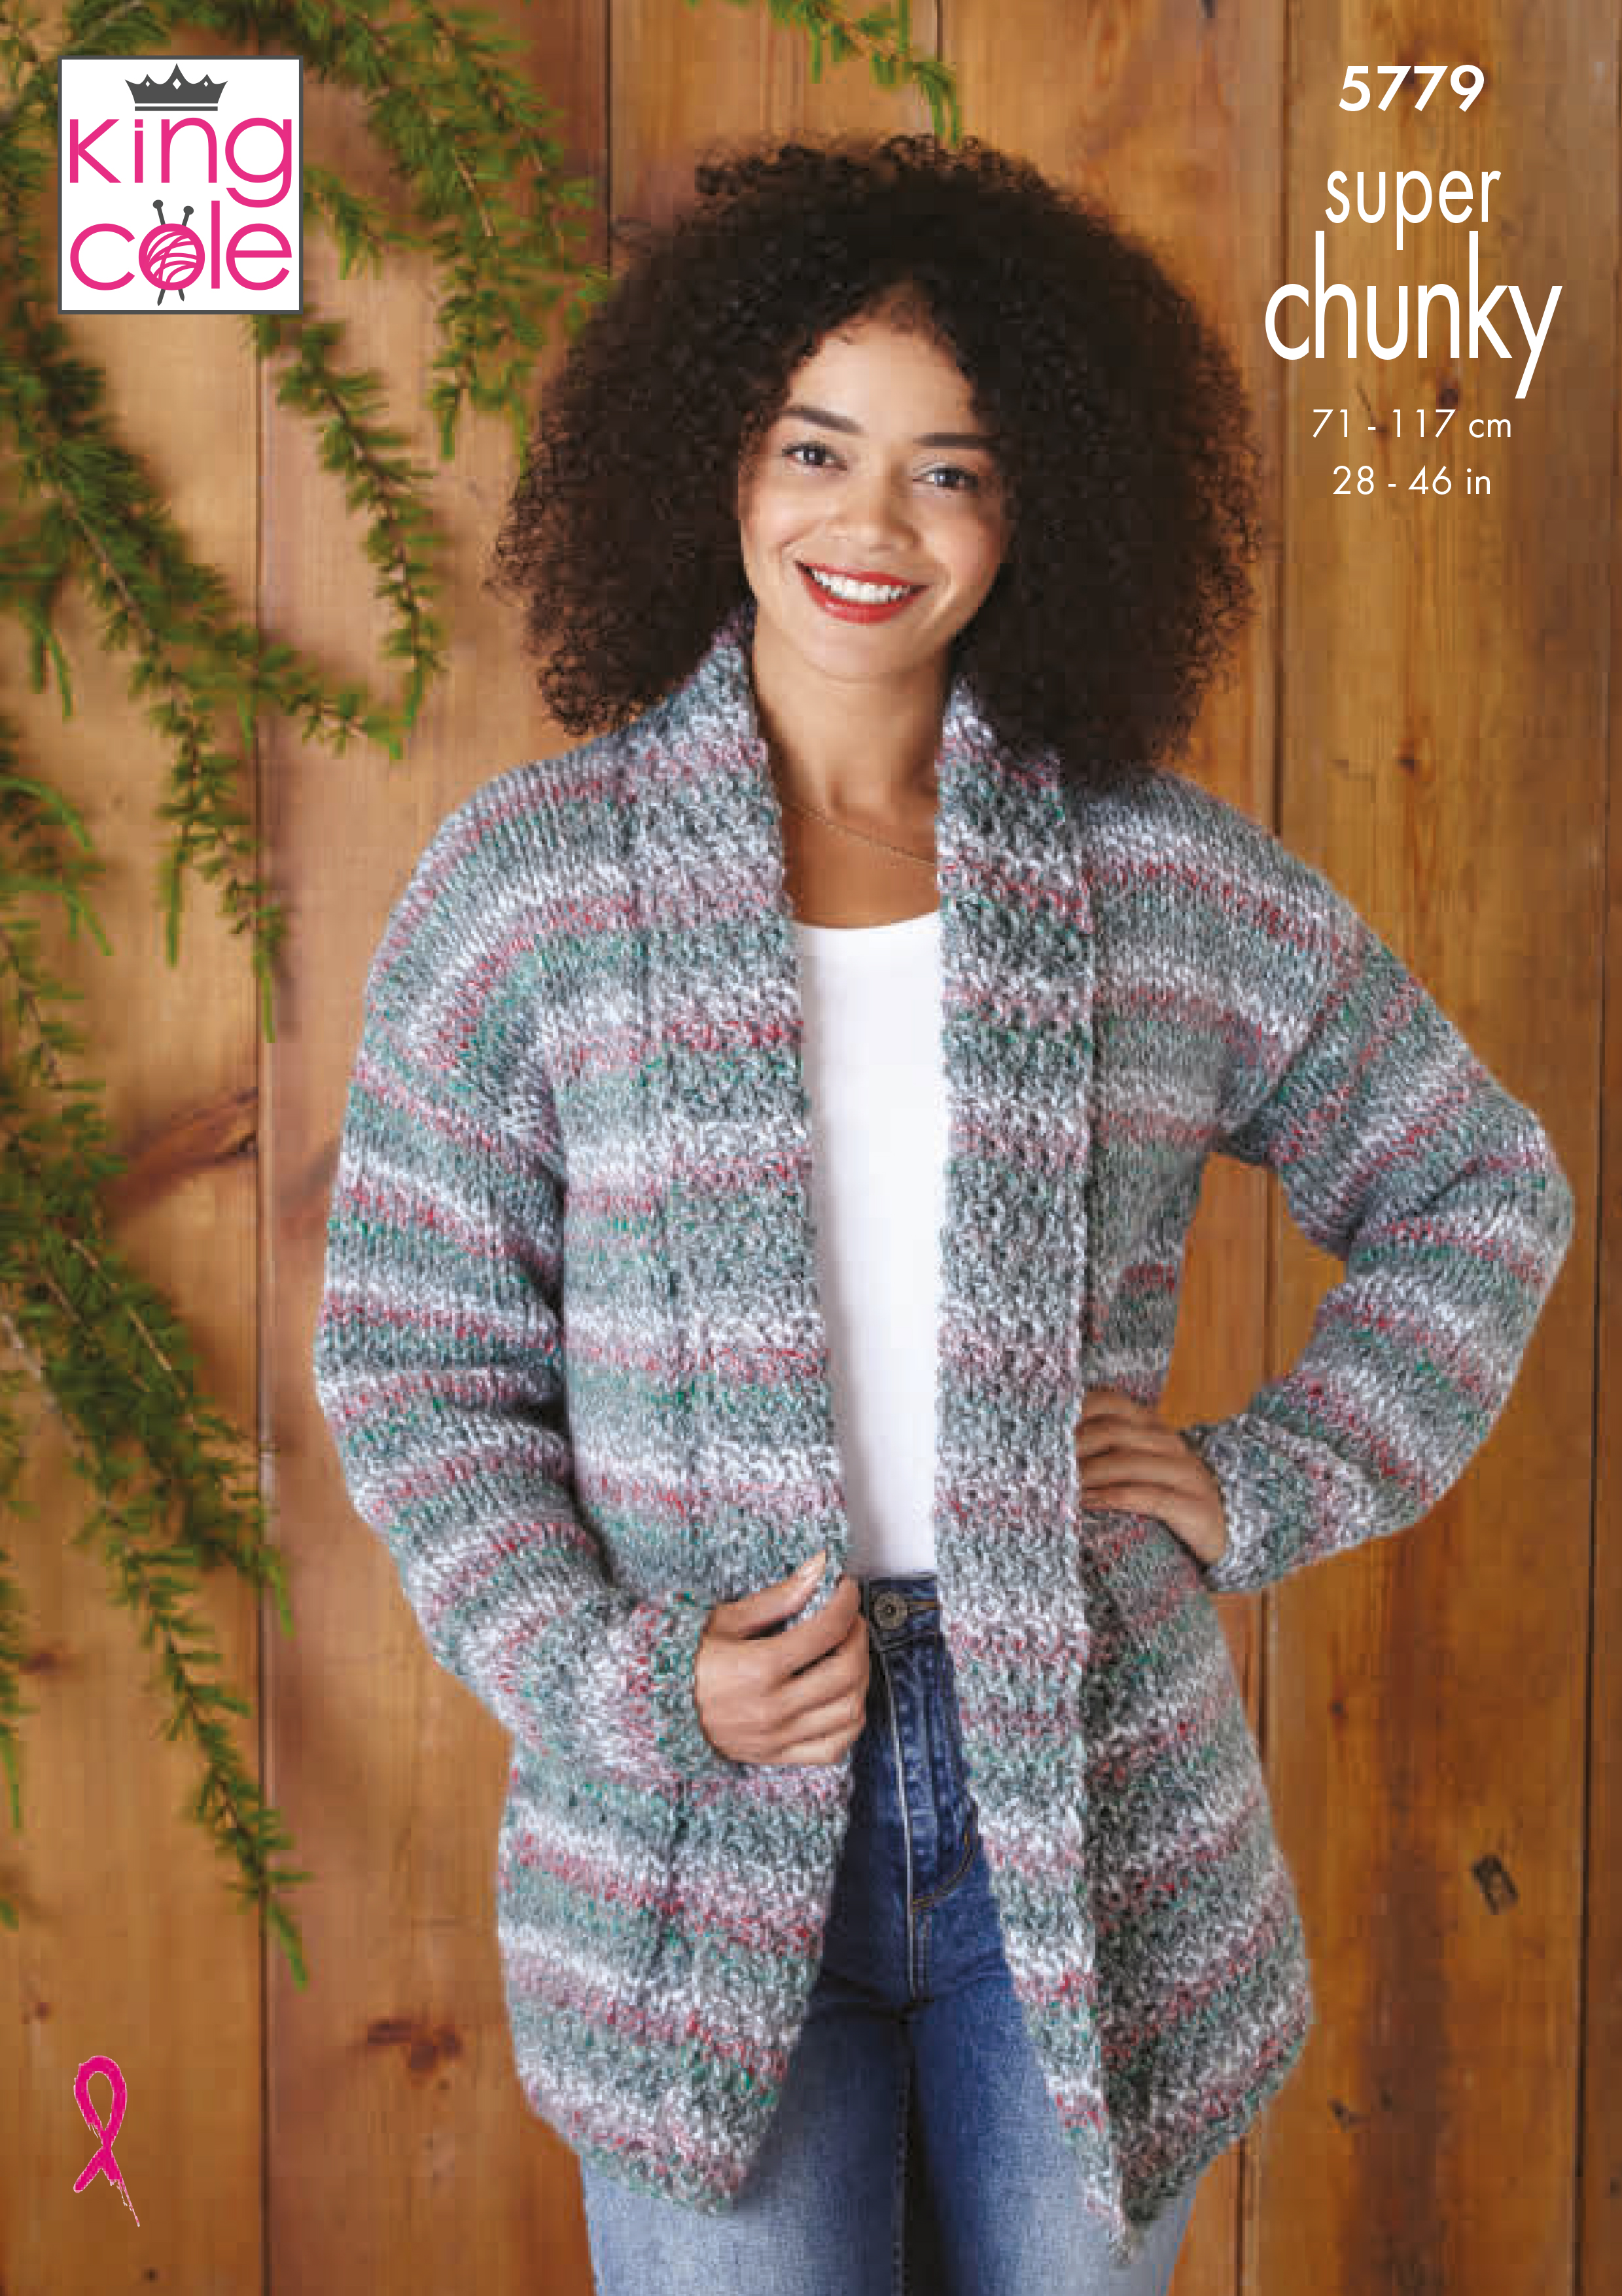 Jacket & Sweater Knitted in Christmas Super Chunky 5779 x3 - Click Image to Close